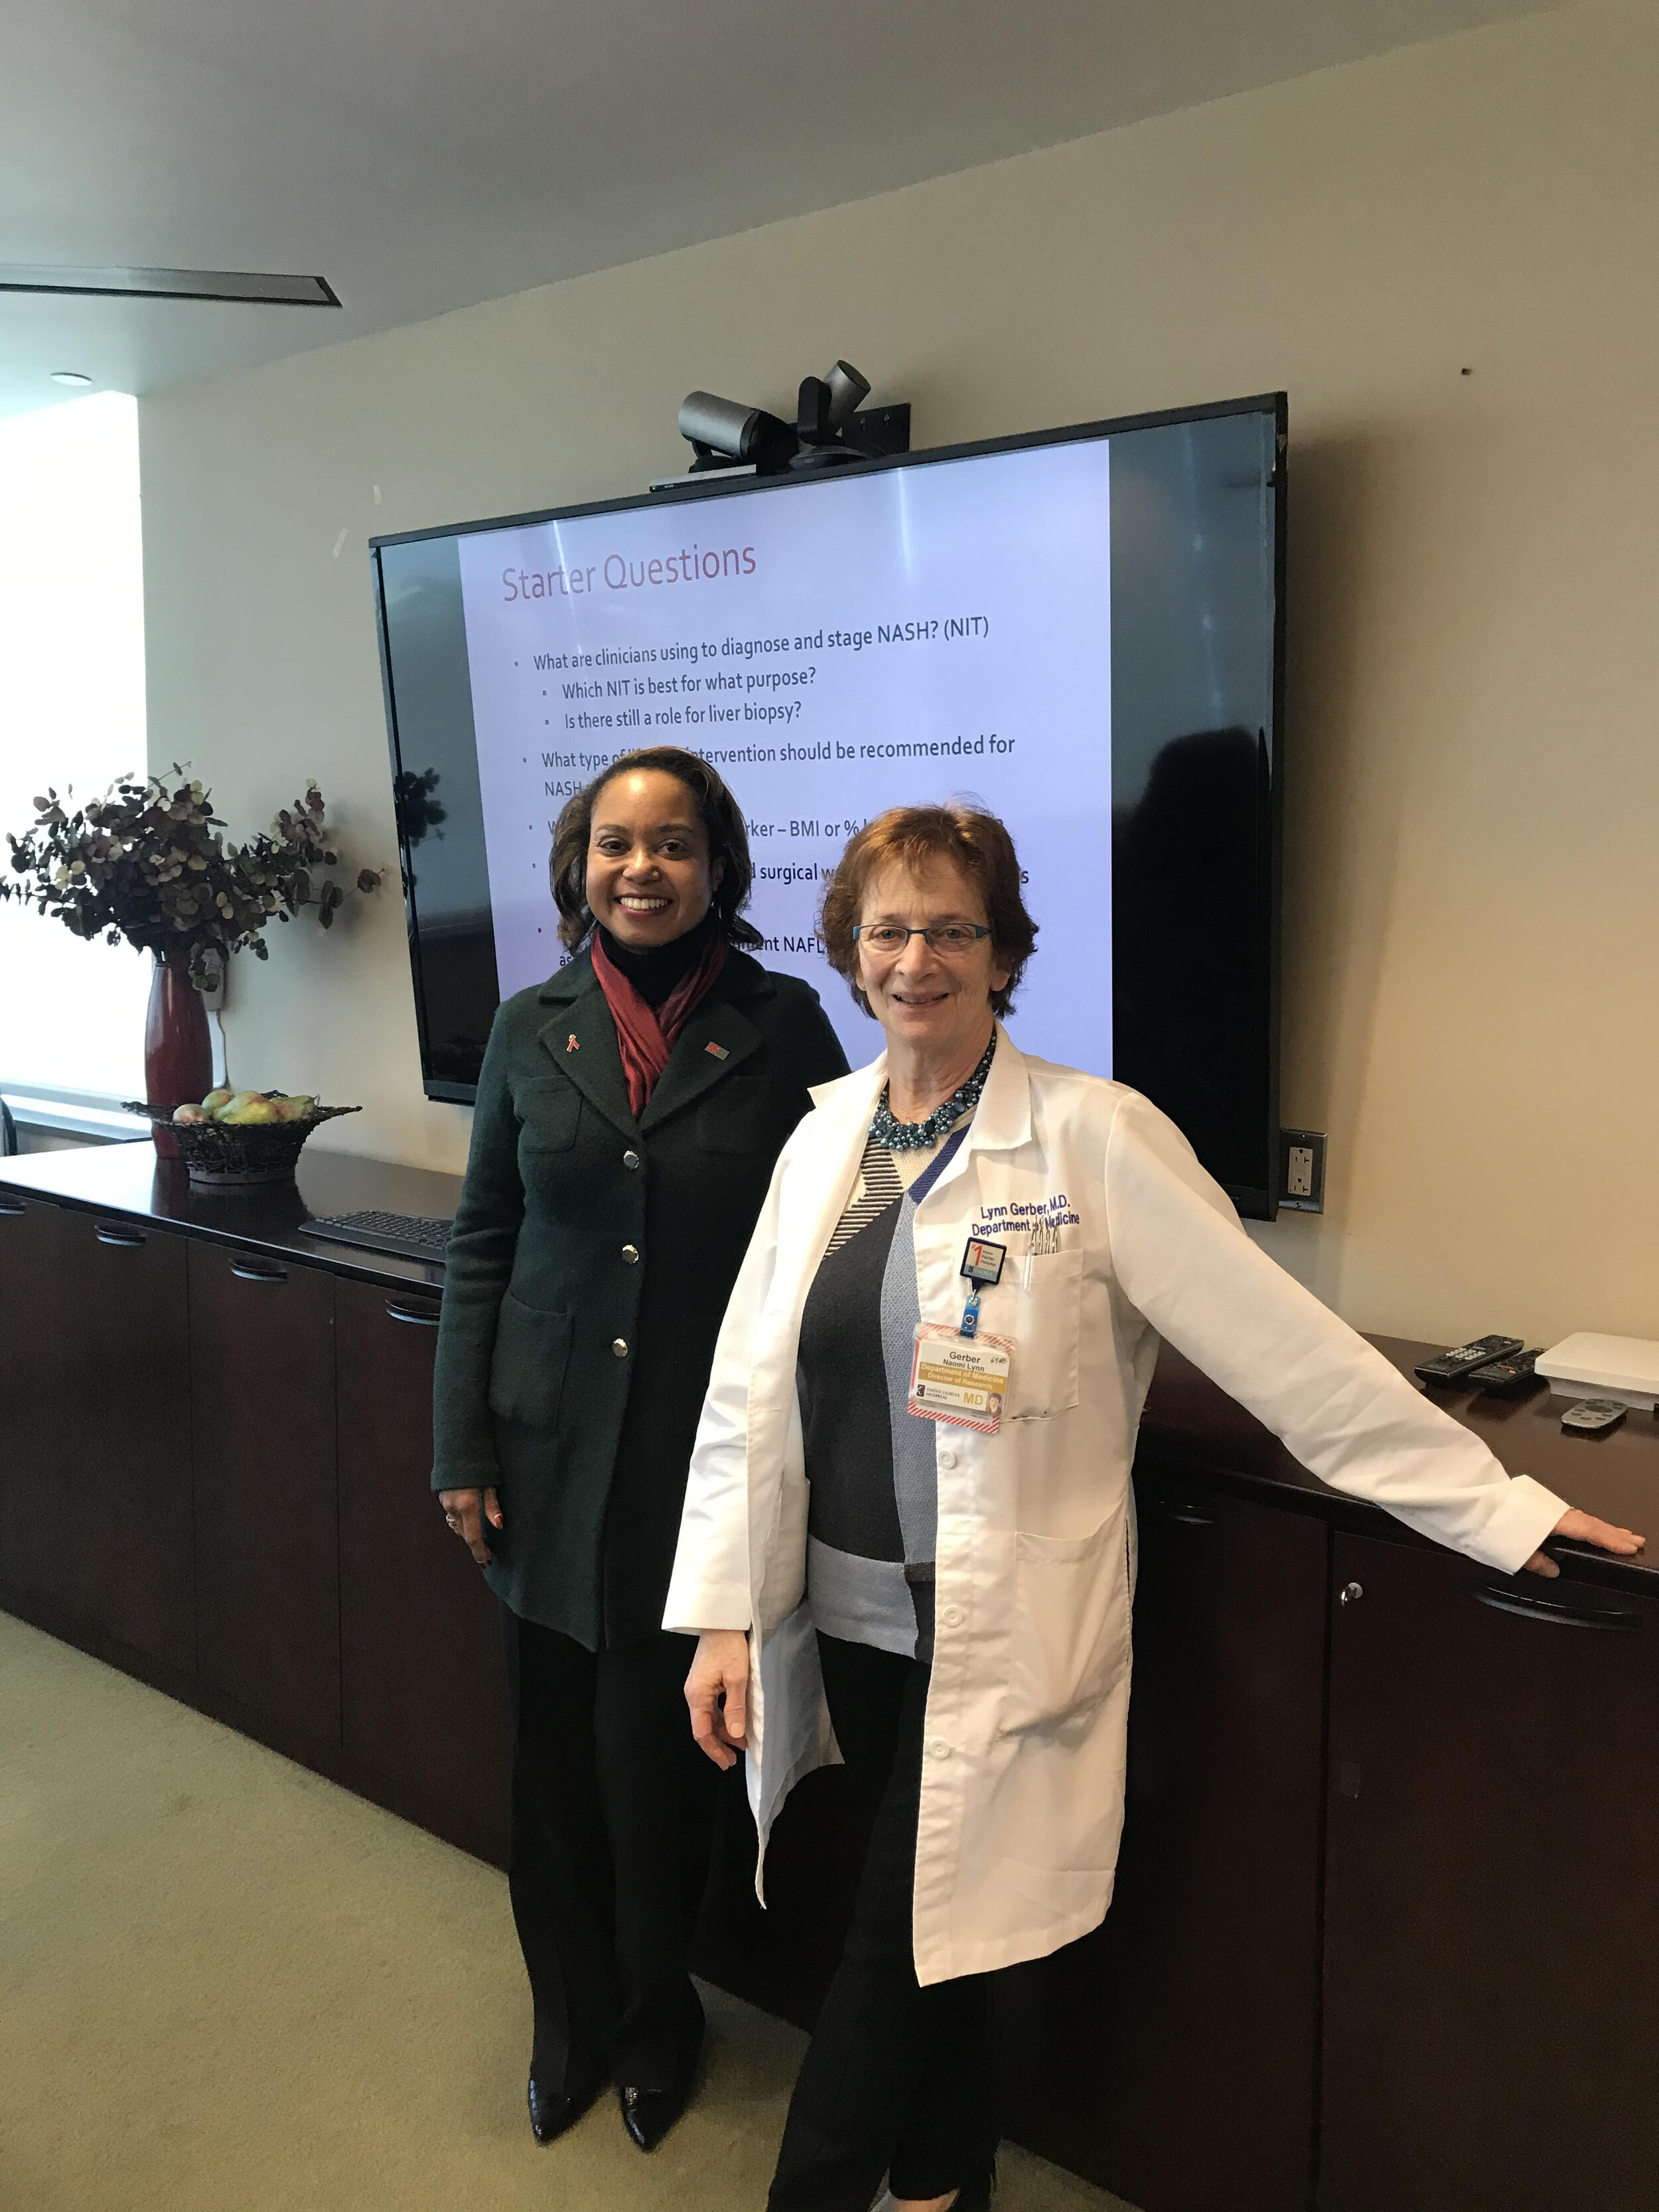  Exciting meeting with Dr. Lynn Gerber and the rest of the Beatty Liver &amp; Obesity Research Program team at Inova Fairfax Hospital. Many opportunities to collaborate on patient-centric research!  